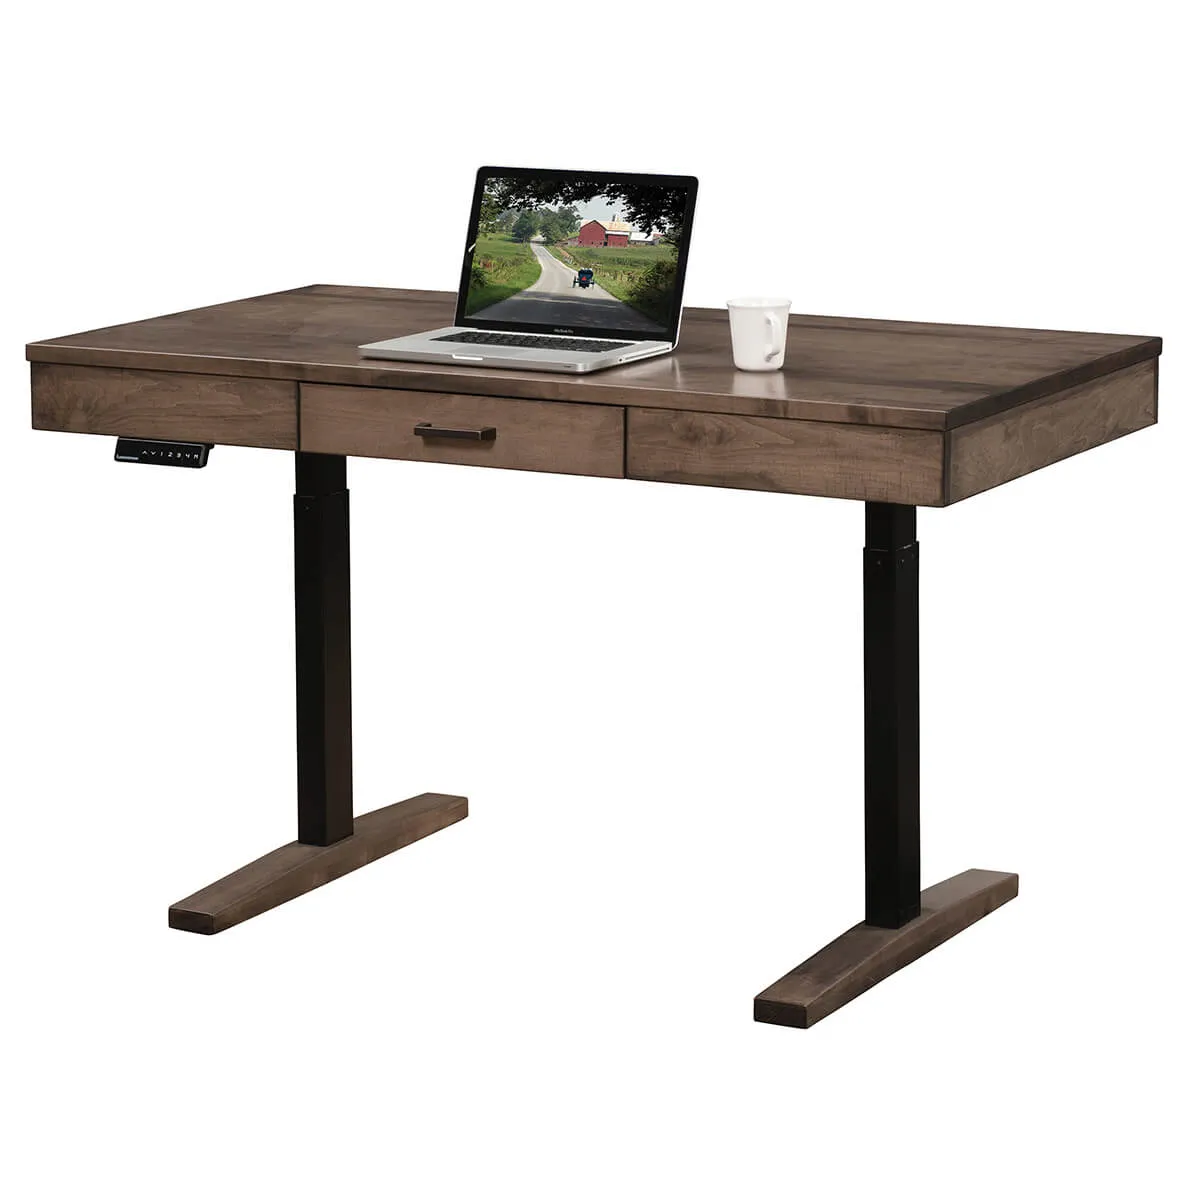 56 Inch Urbana Sit and Stand Desk